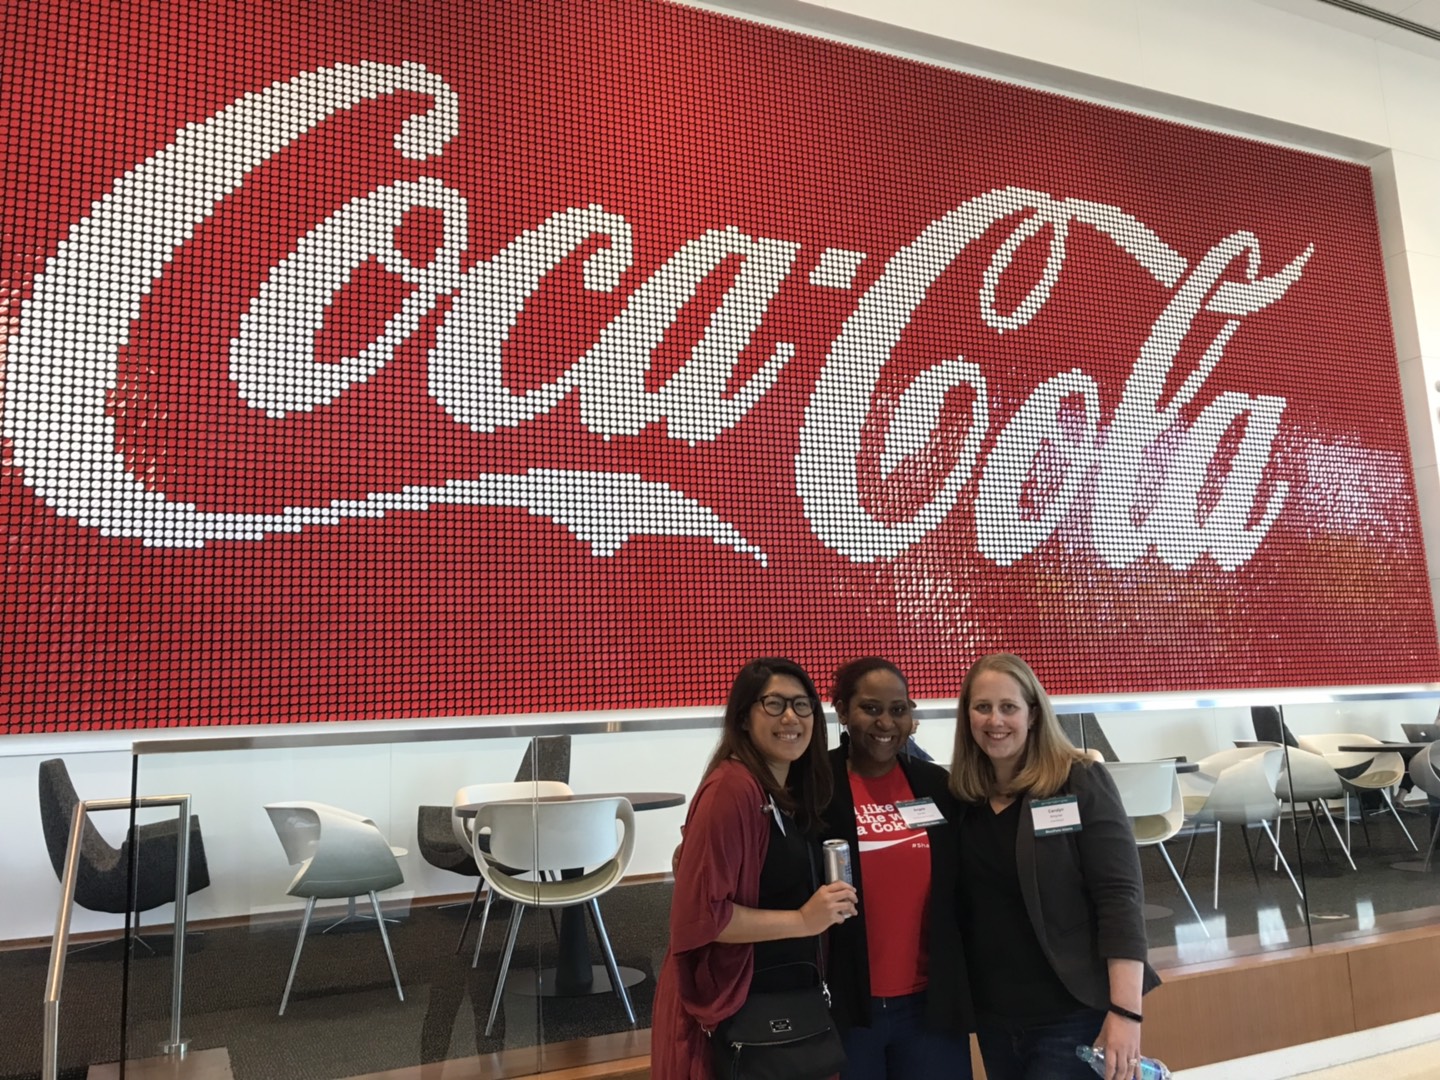  L-R Claudine Ting, Marketing Specialist for Client Sucess at SmartSimple, Angela Randle, Grant Administrator for the Coca-Cola Company Carolyn Bringman, Regional Manager for SmartSimple 